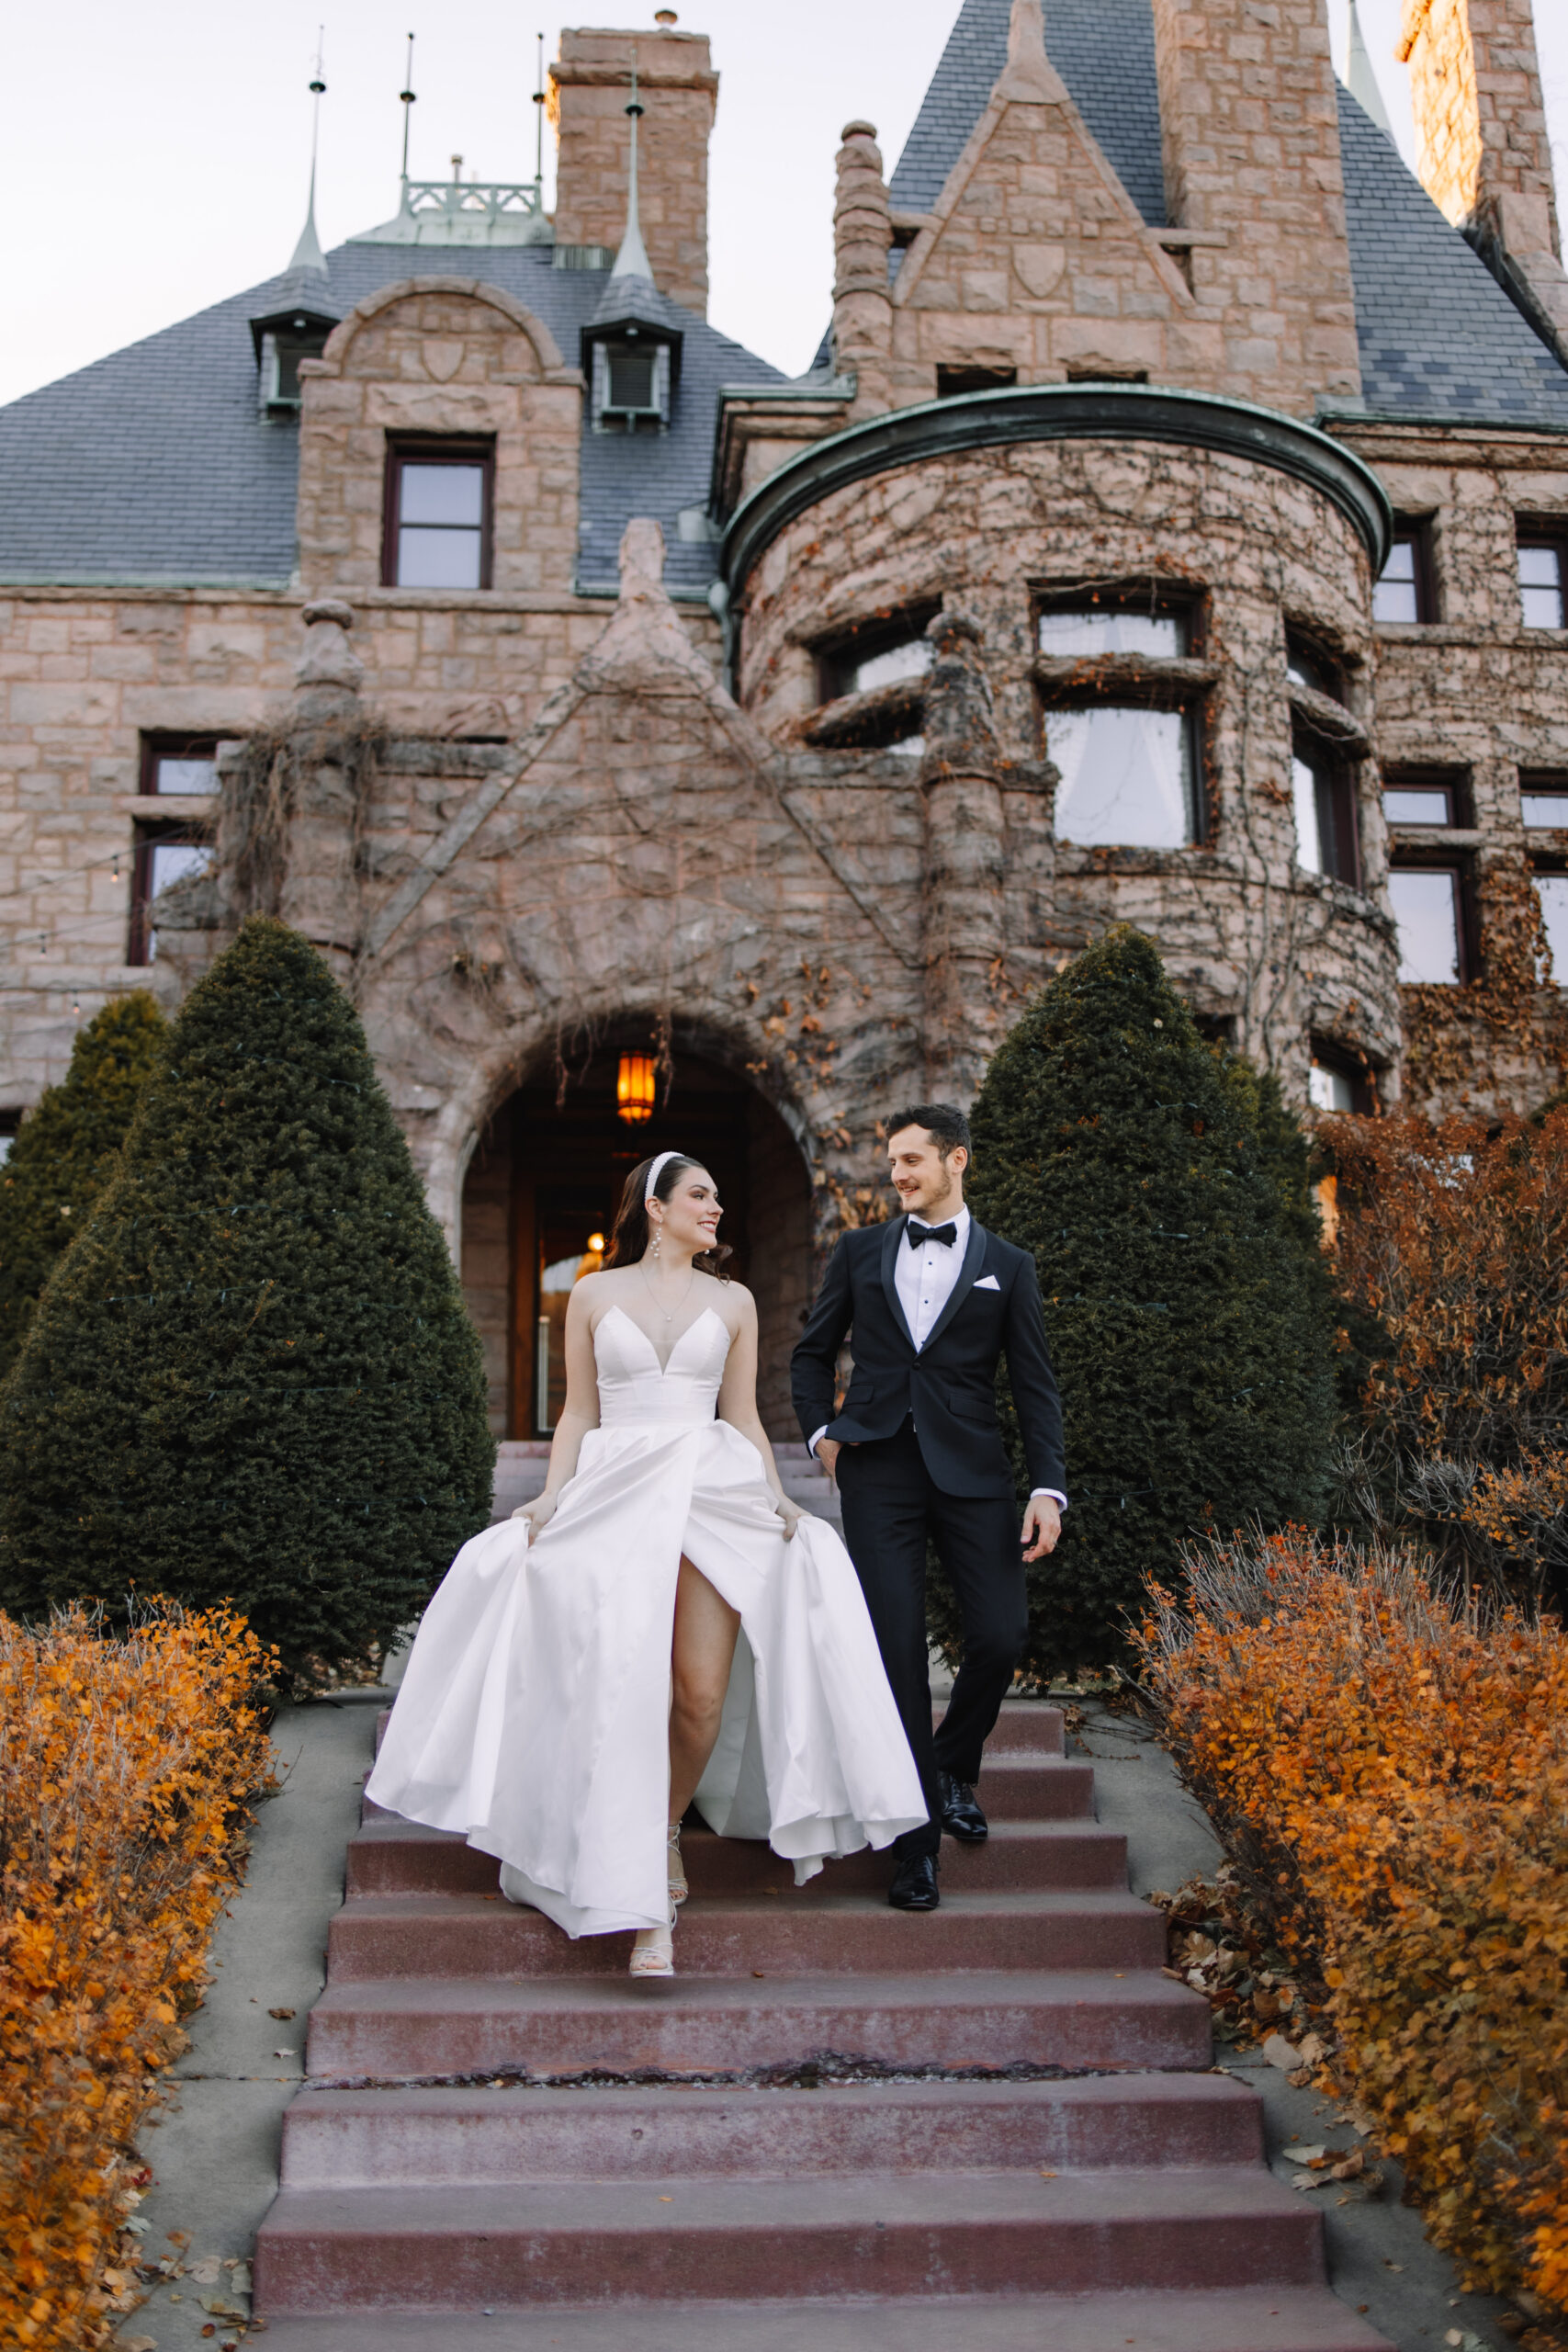 A couple in formal wedding attire walking down the steps of an ornate castle-like building called the Van Dusen Mansion in Minneapolis